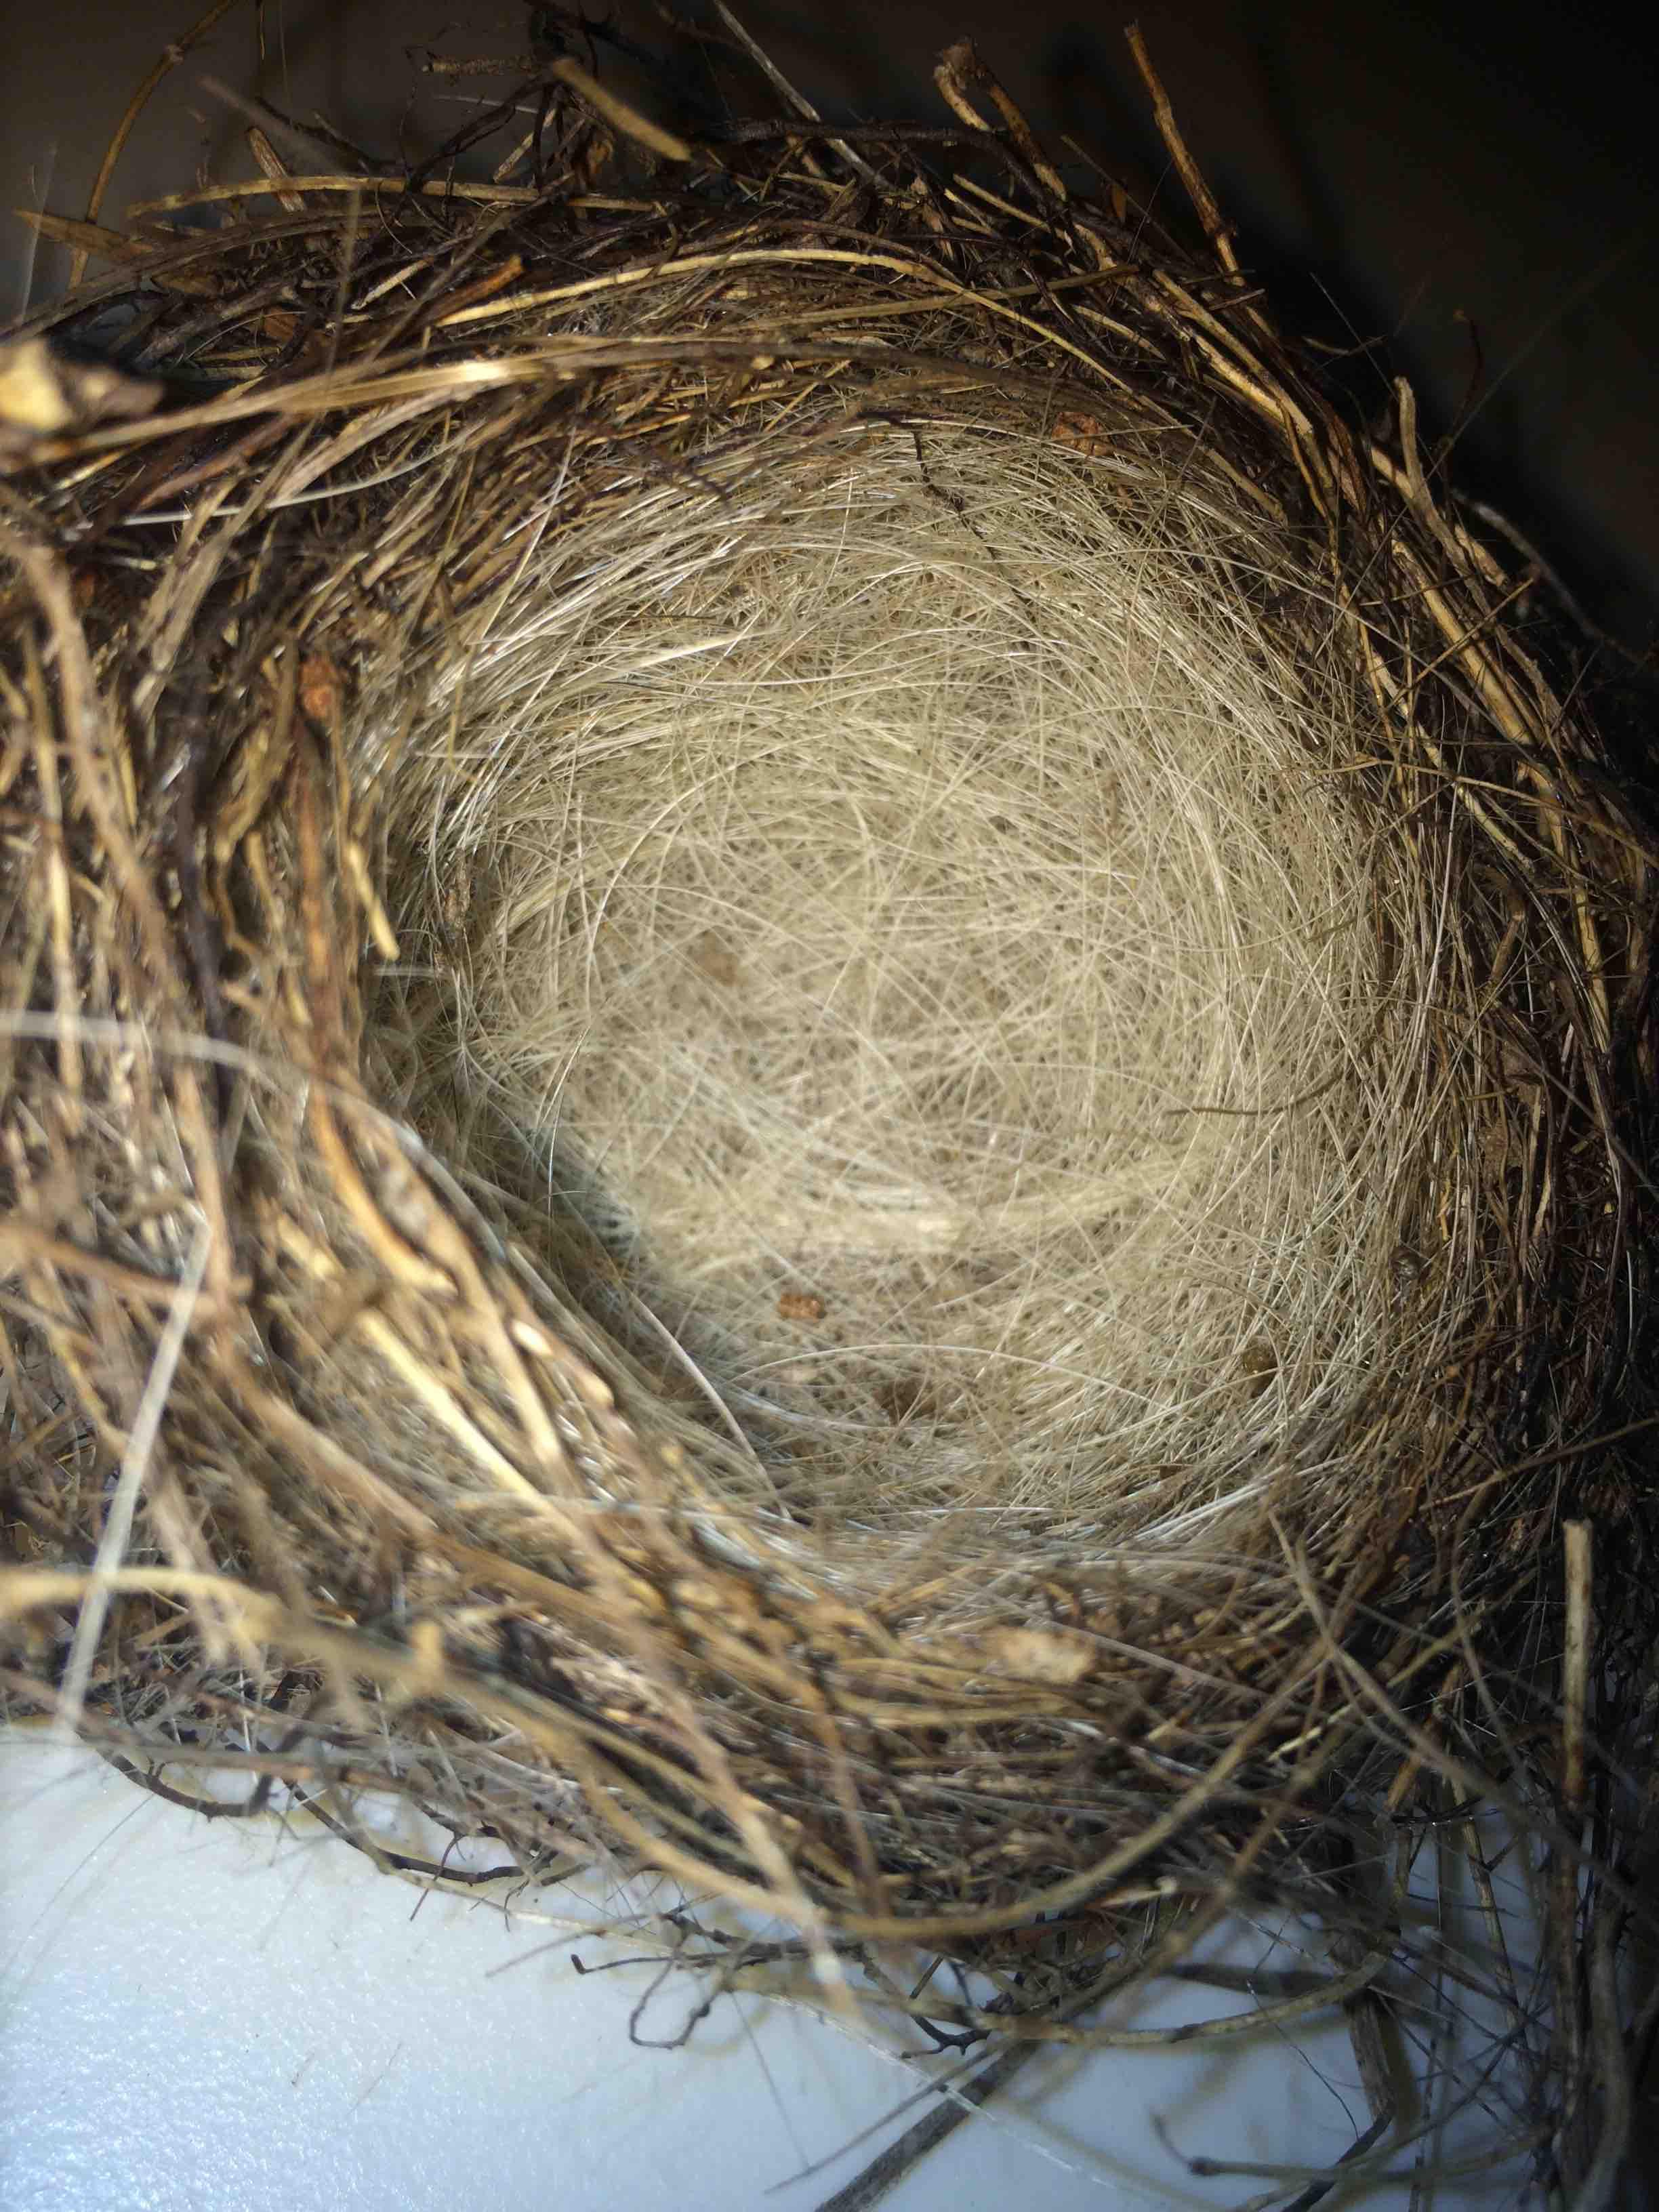 Found a bird nest in my yard. The inside is lined with my dog's fur ...